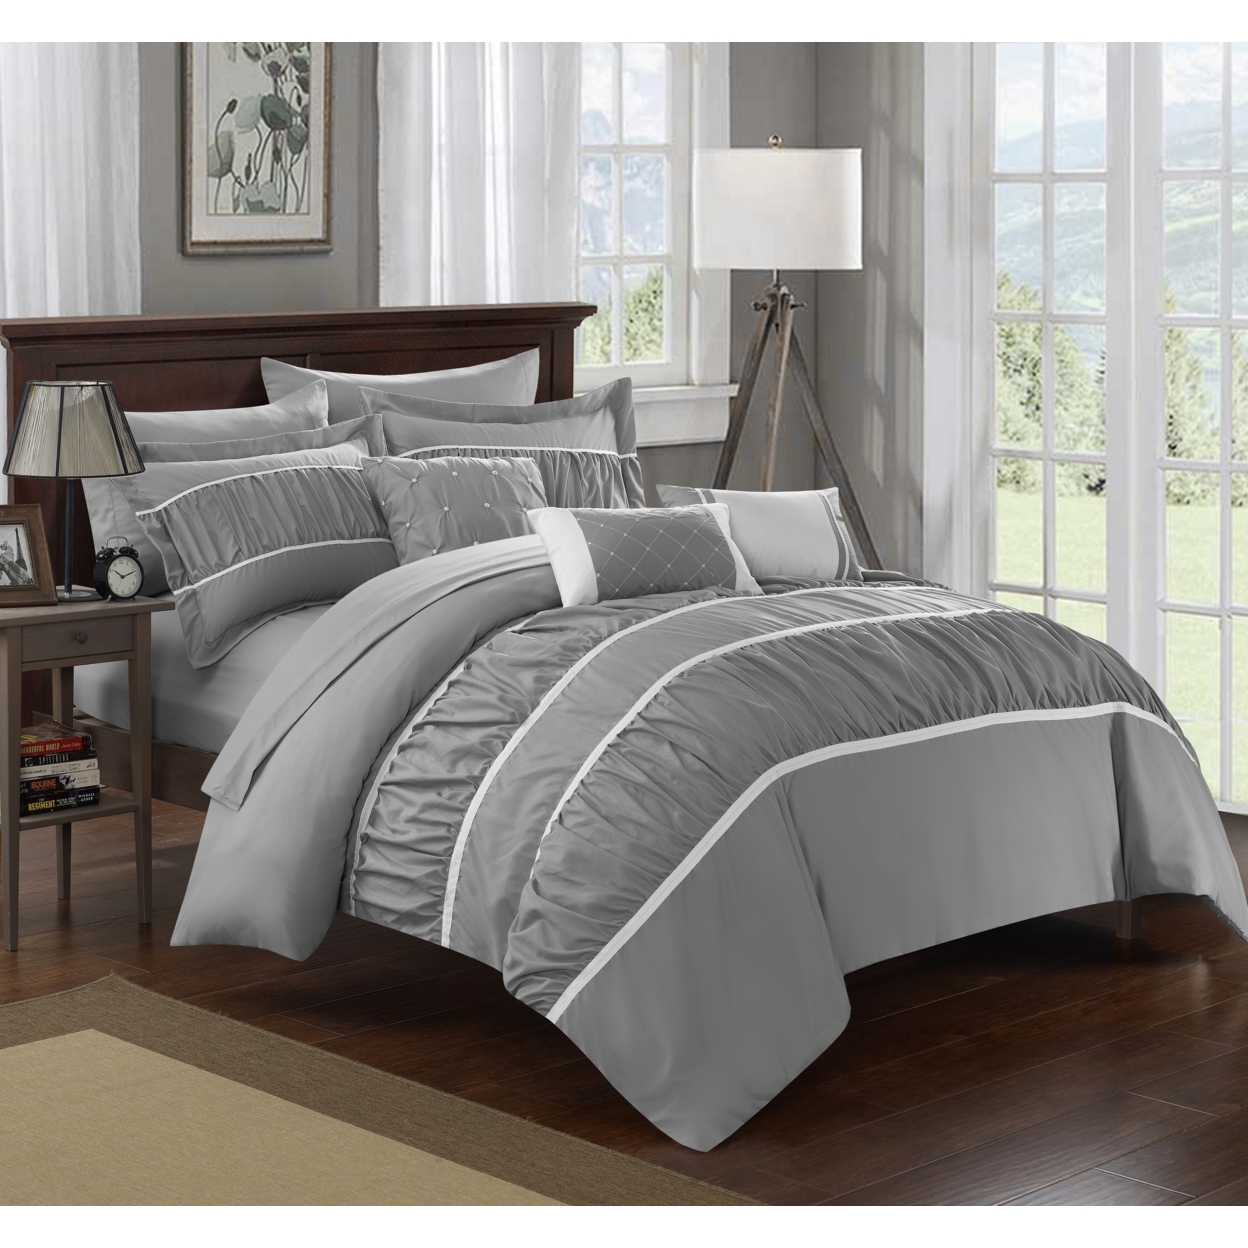 10-Piece Aero Pleated & Ruffled Bed In A Bag Comforter And Sheet Set - Grey, King